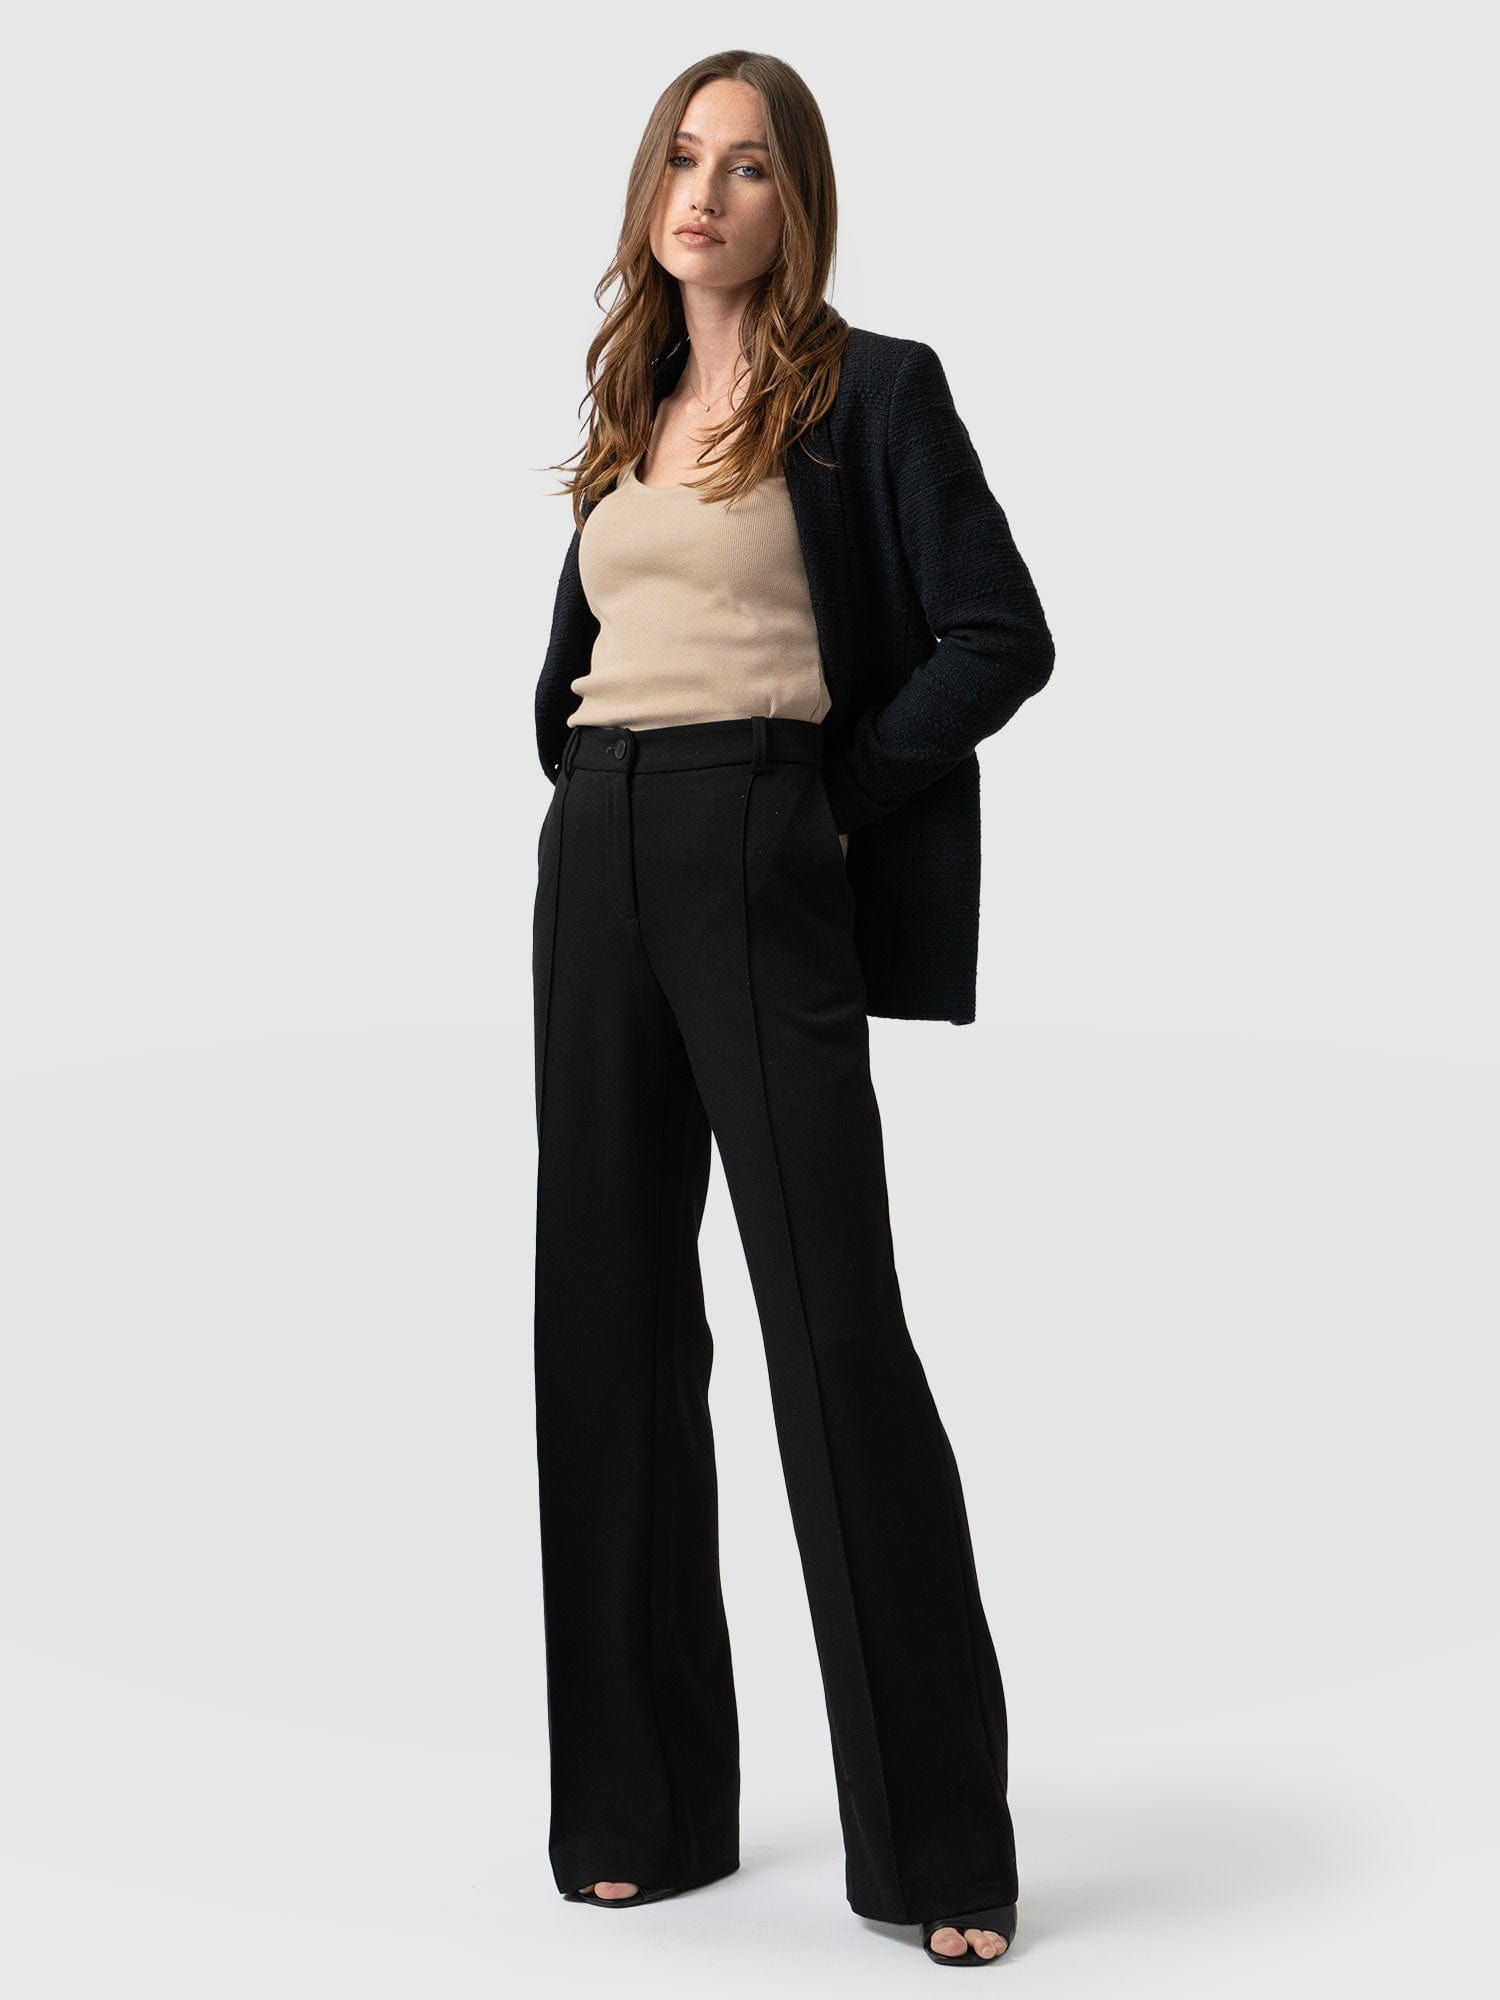 Investments the PARK AVE fit Stretch Straight Leg Pants | Dillard's